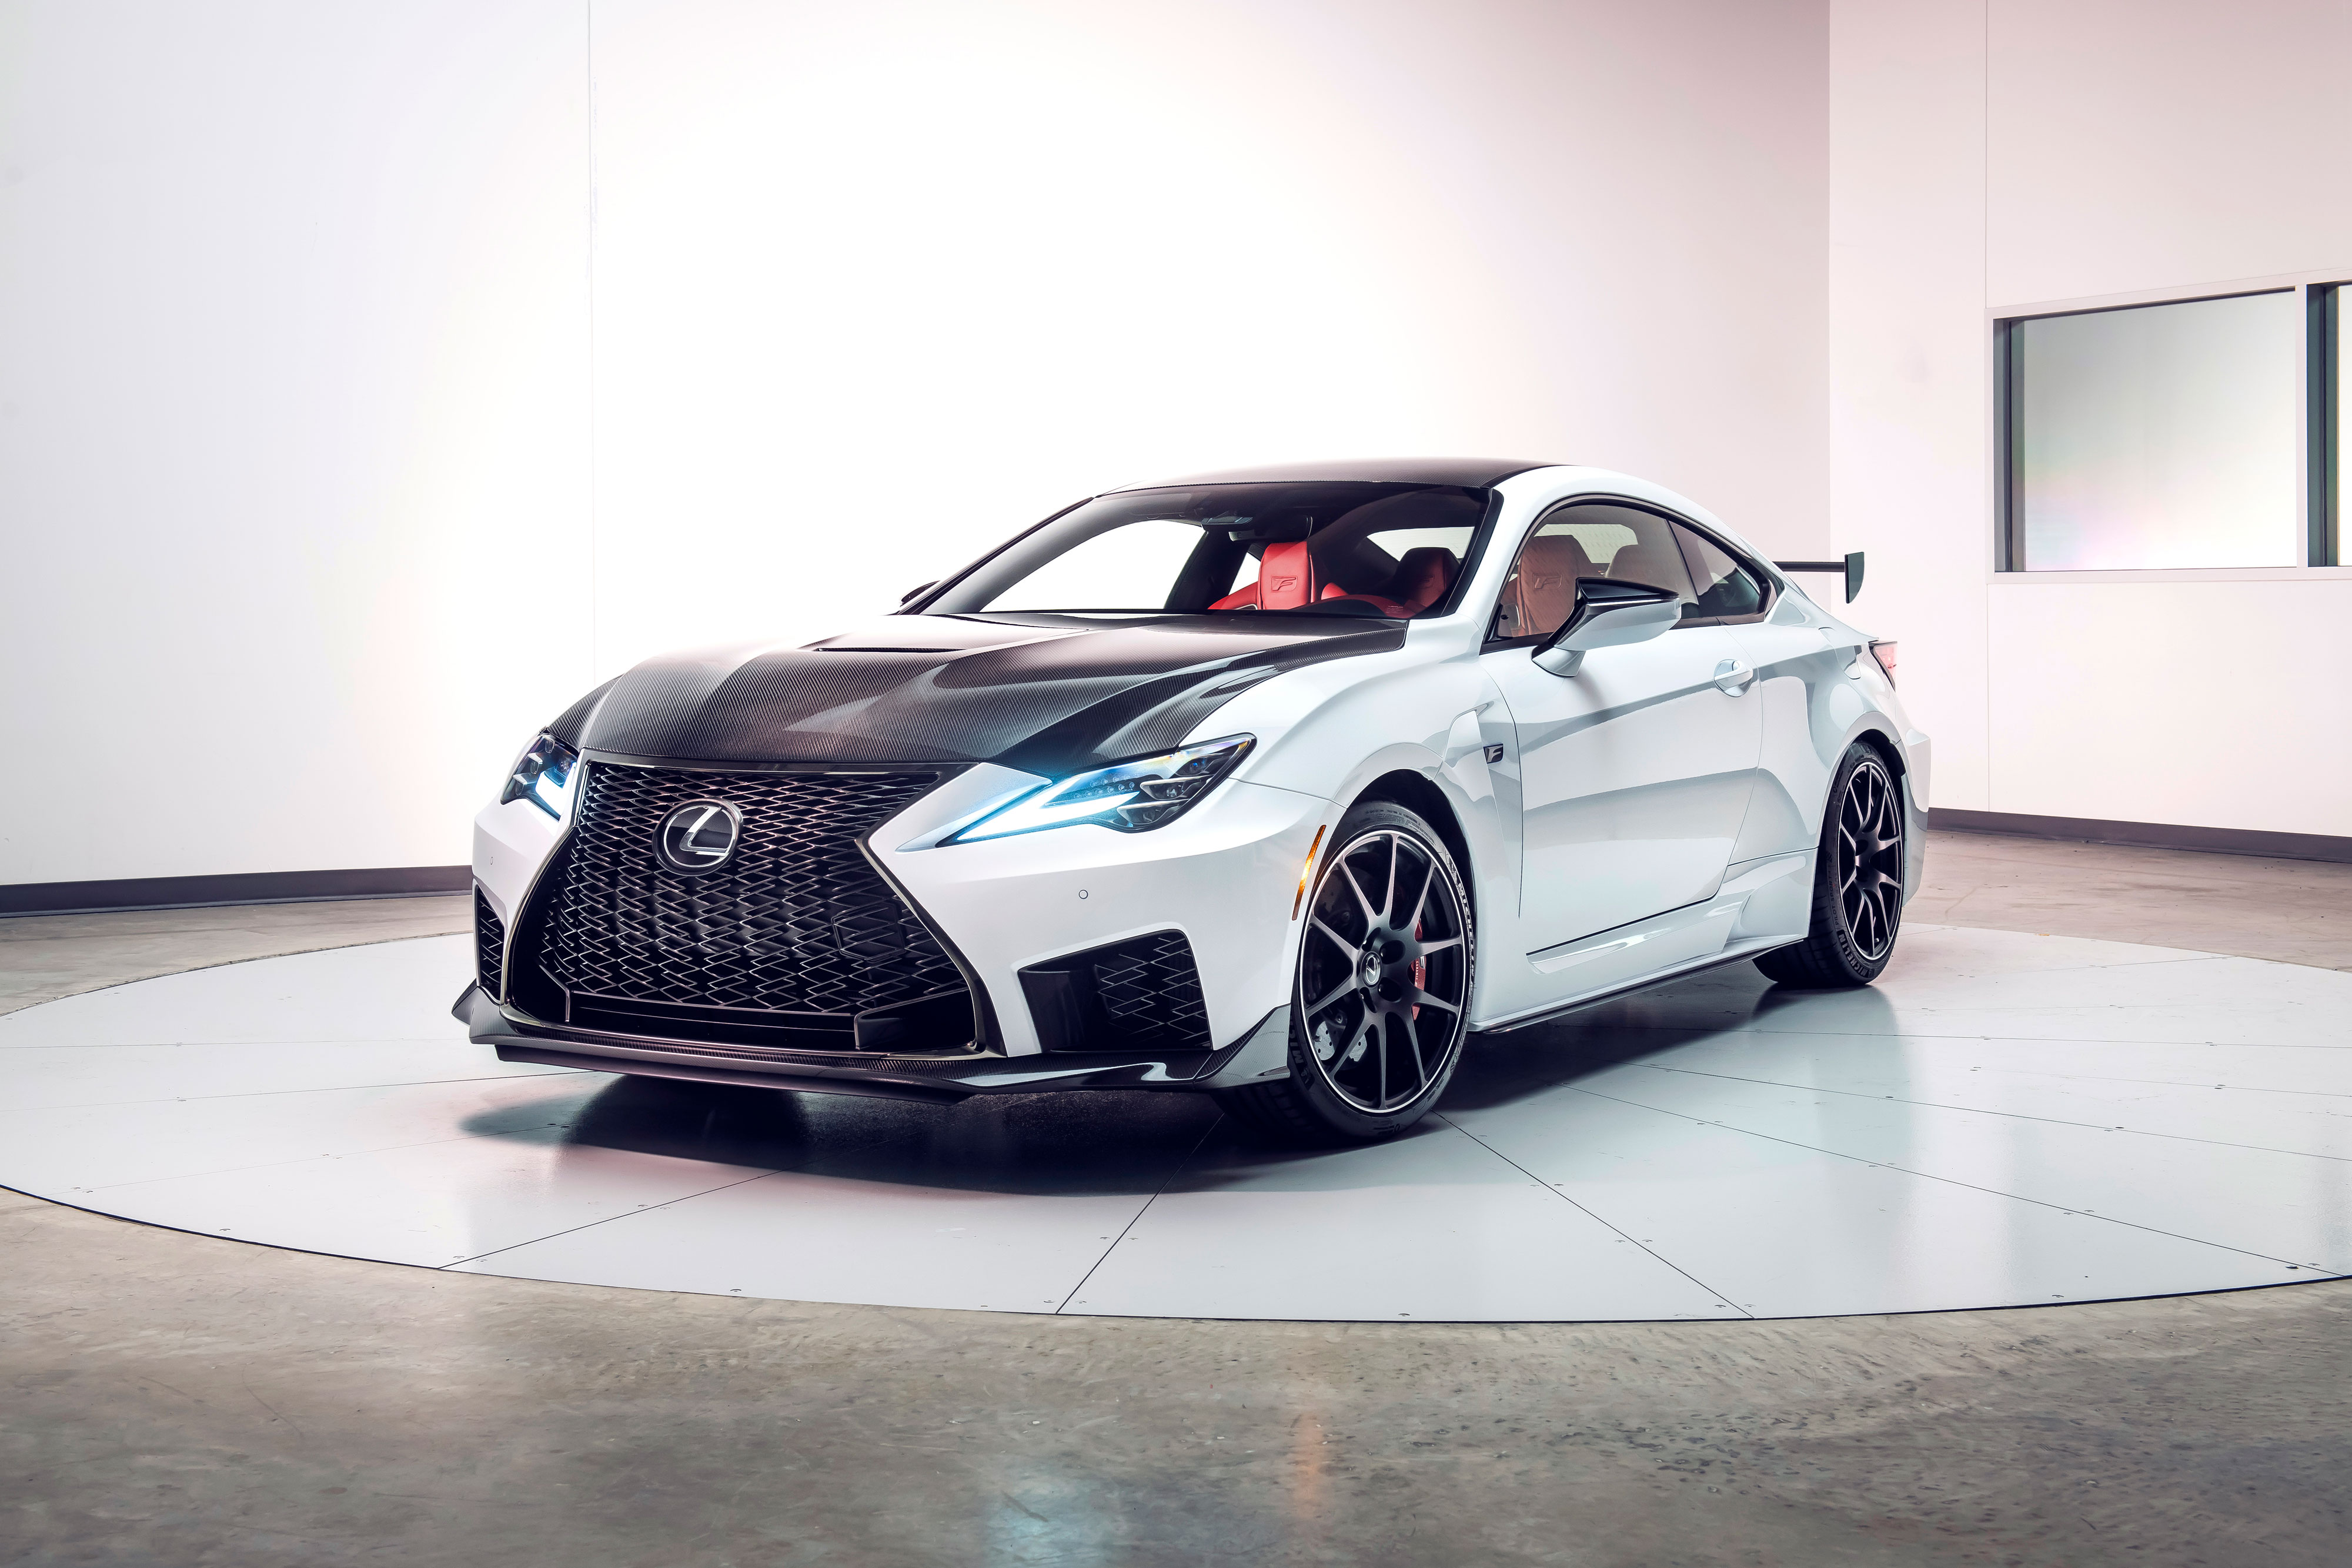 Introducing the Lexus RC F Track Edition & Updated 2020 RC F Coupe